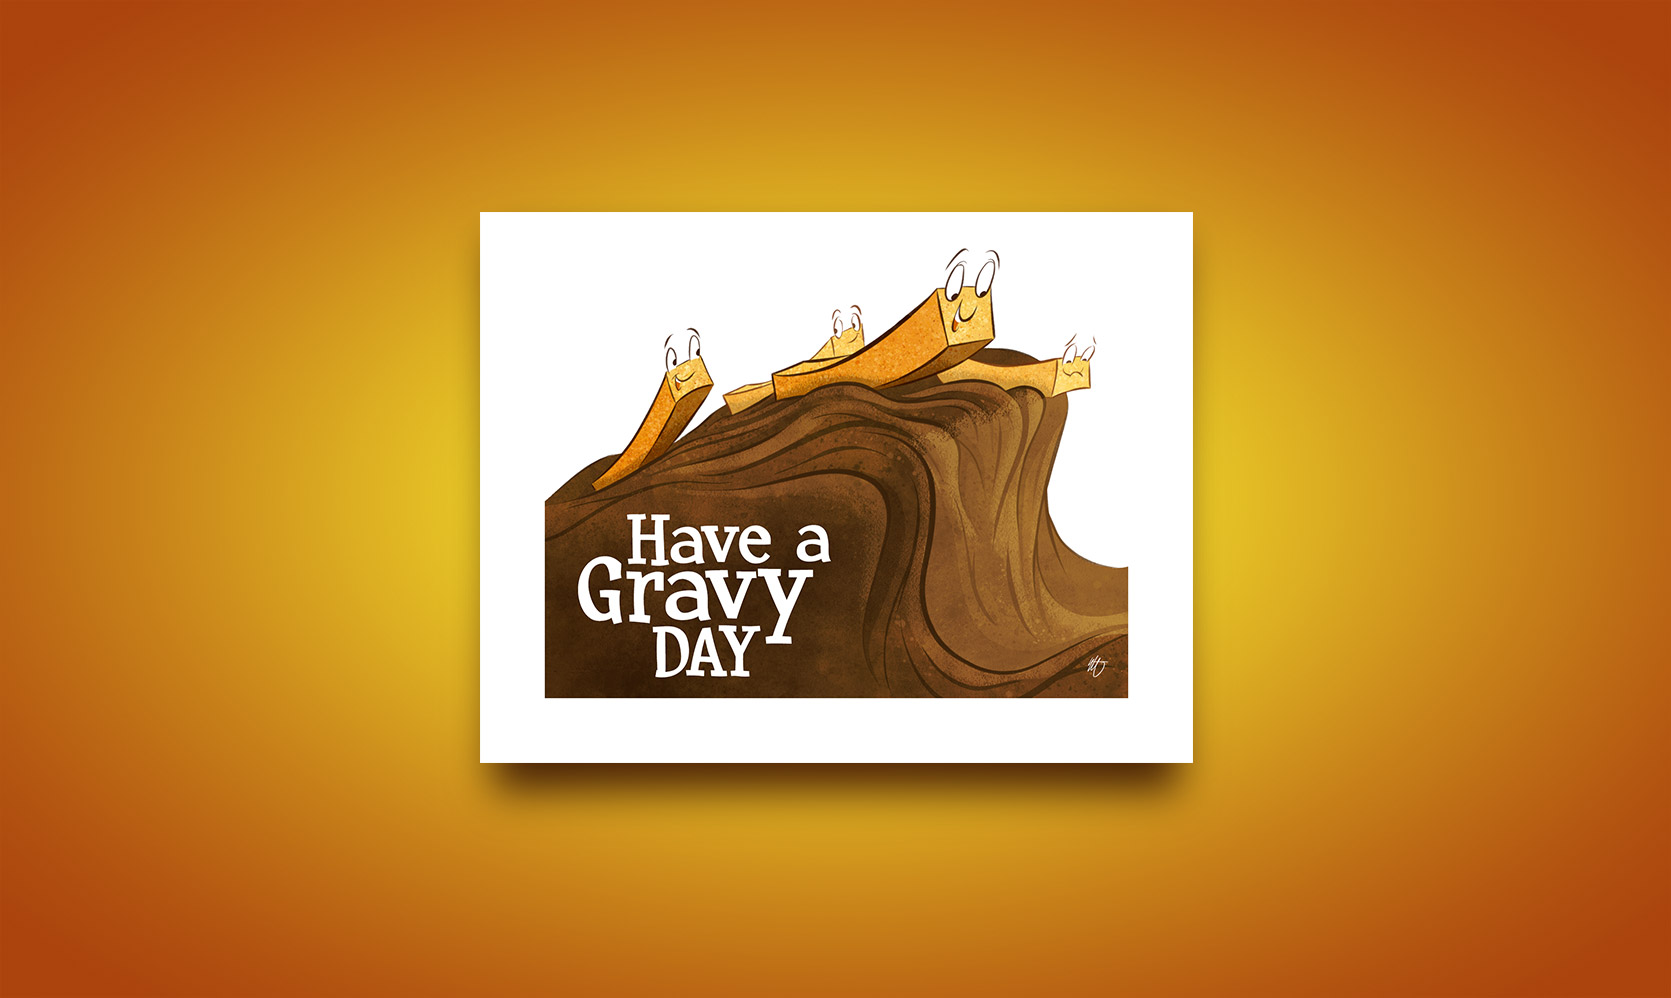 Have a gravy day – Greeting card design available on Etsy